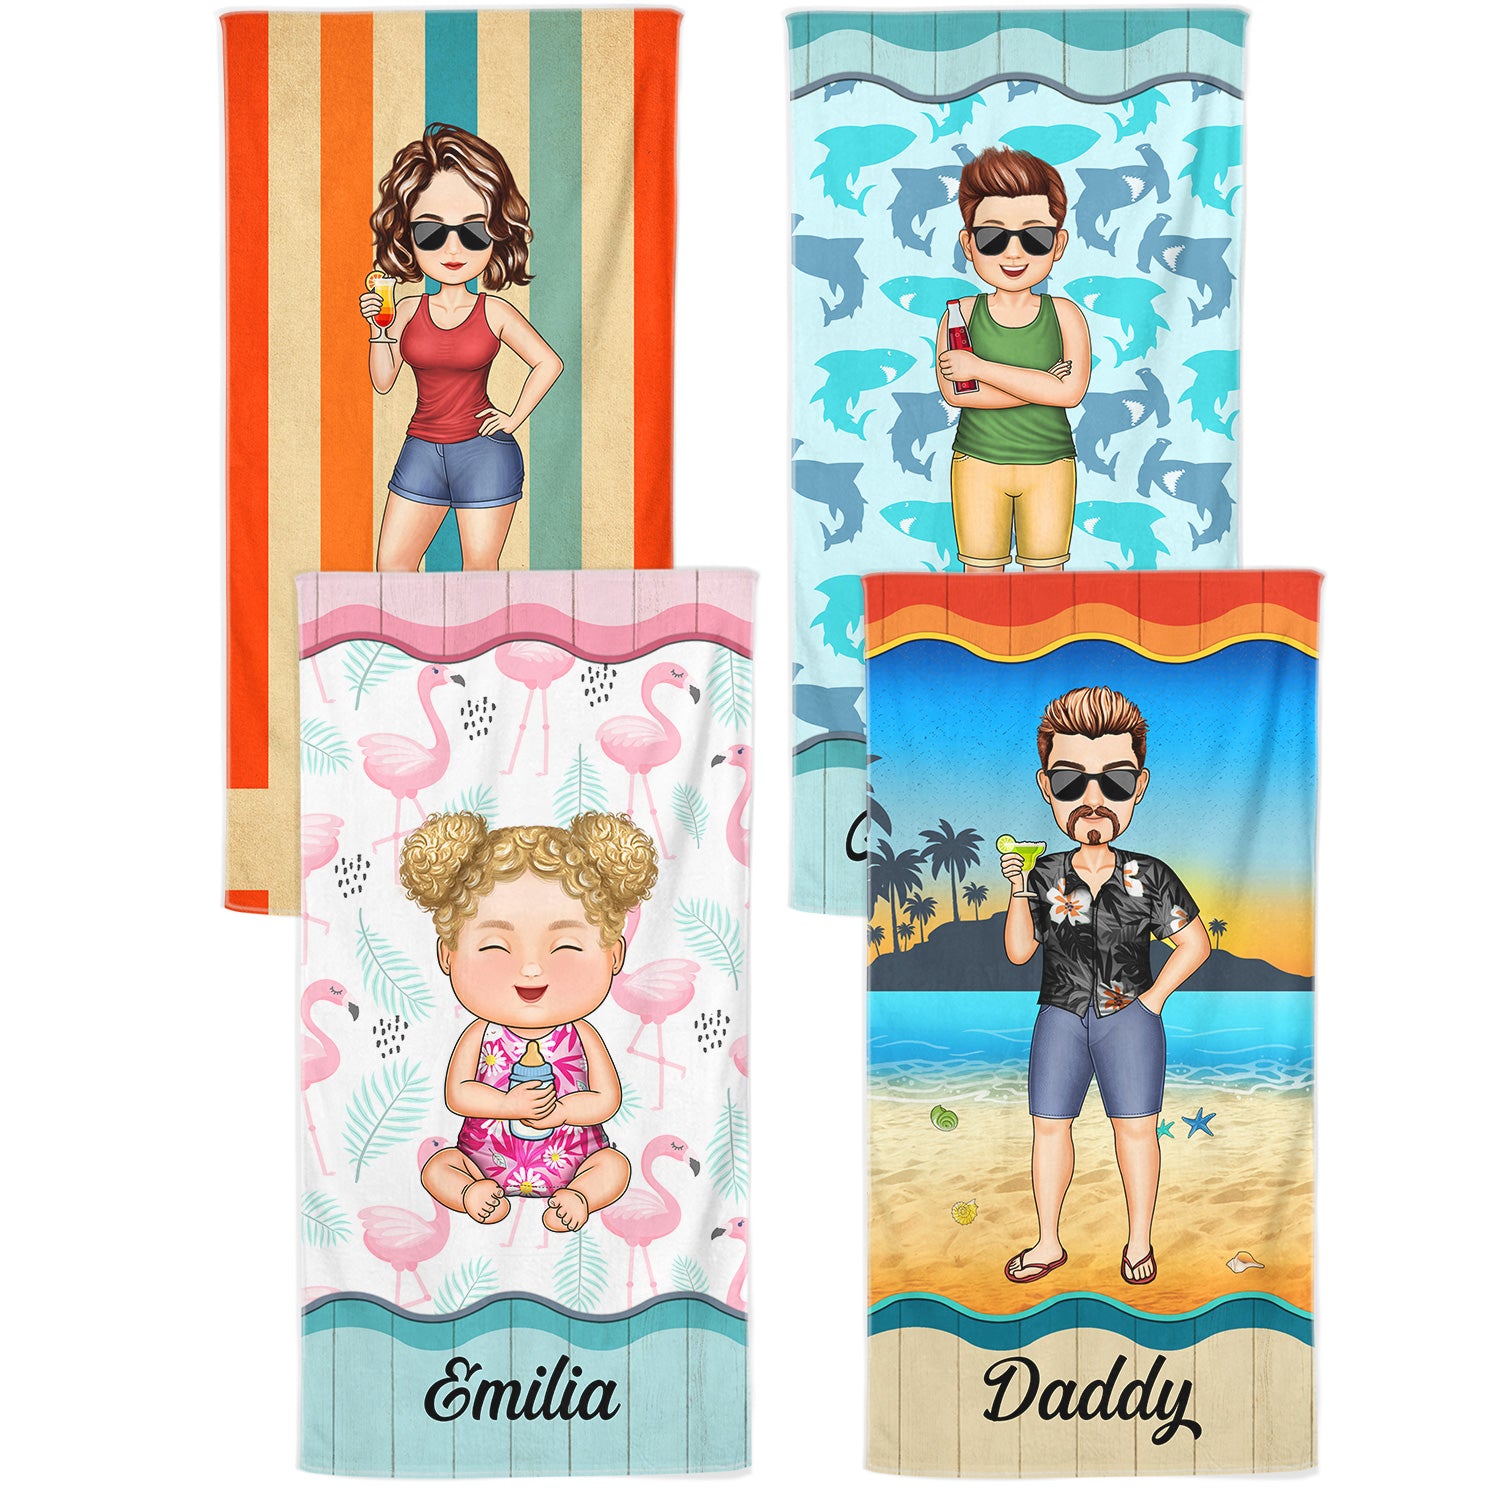 Traveling Beach Poolside Swimming Picnic Vacation - Birthday, Funny Gift Couples, Parents, Family, Kids - Personalized Custom Beach Towel